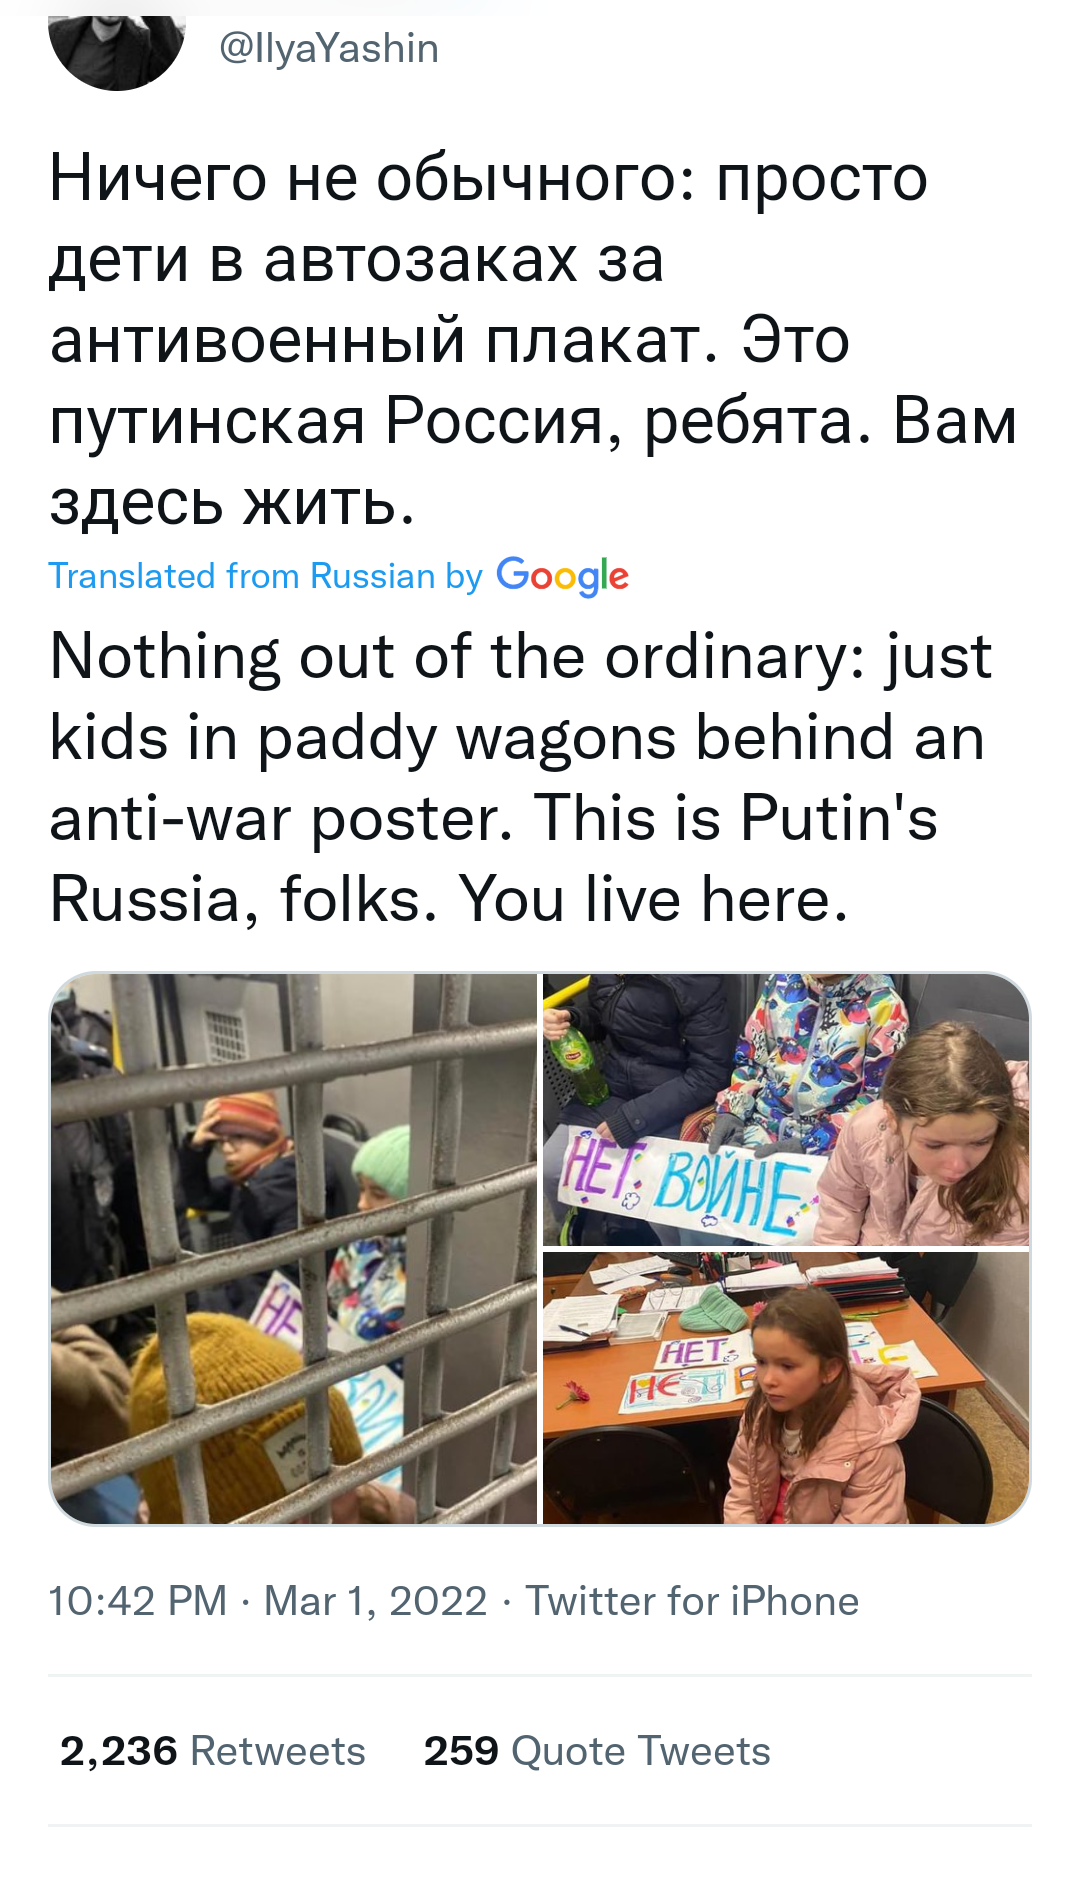 Primary schoolchildren arrested in Russia for waving signs of 